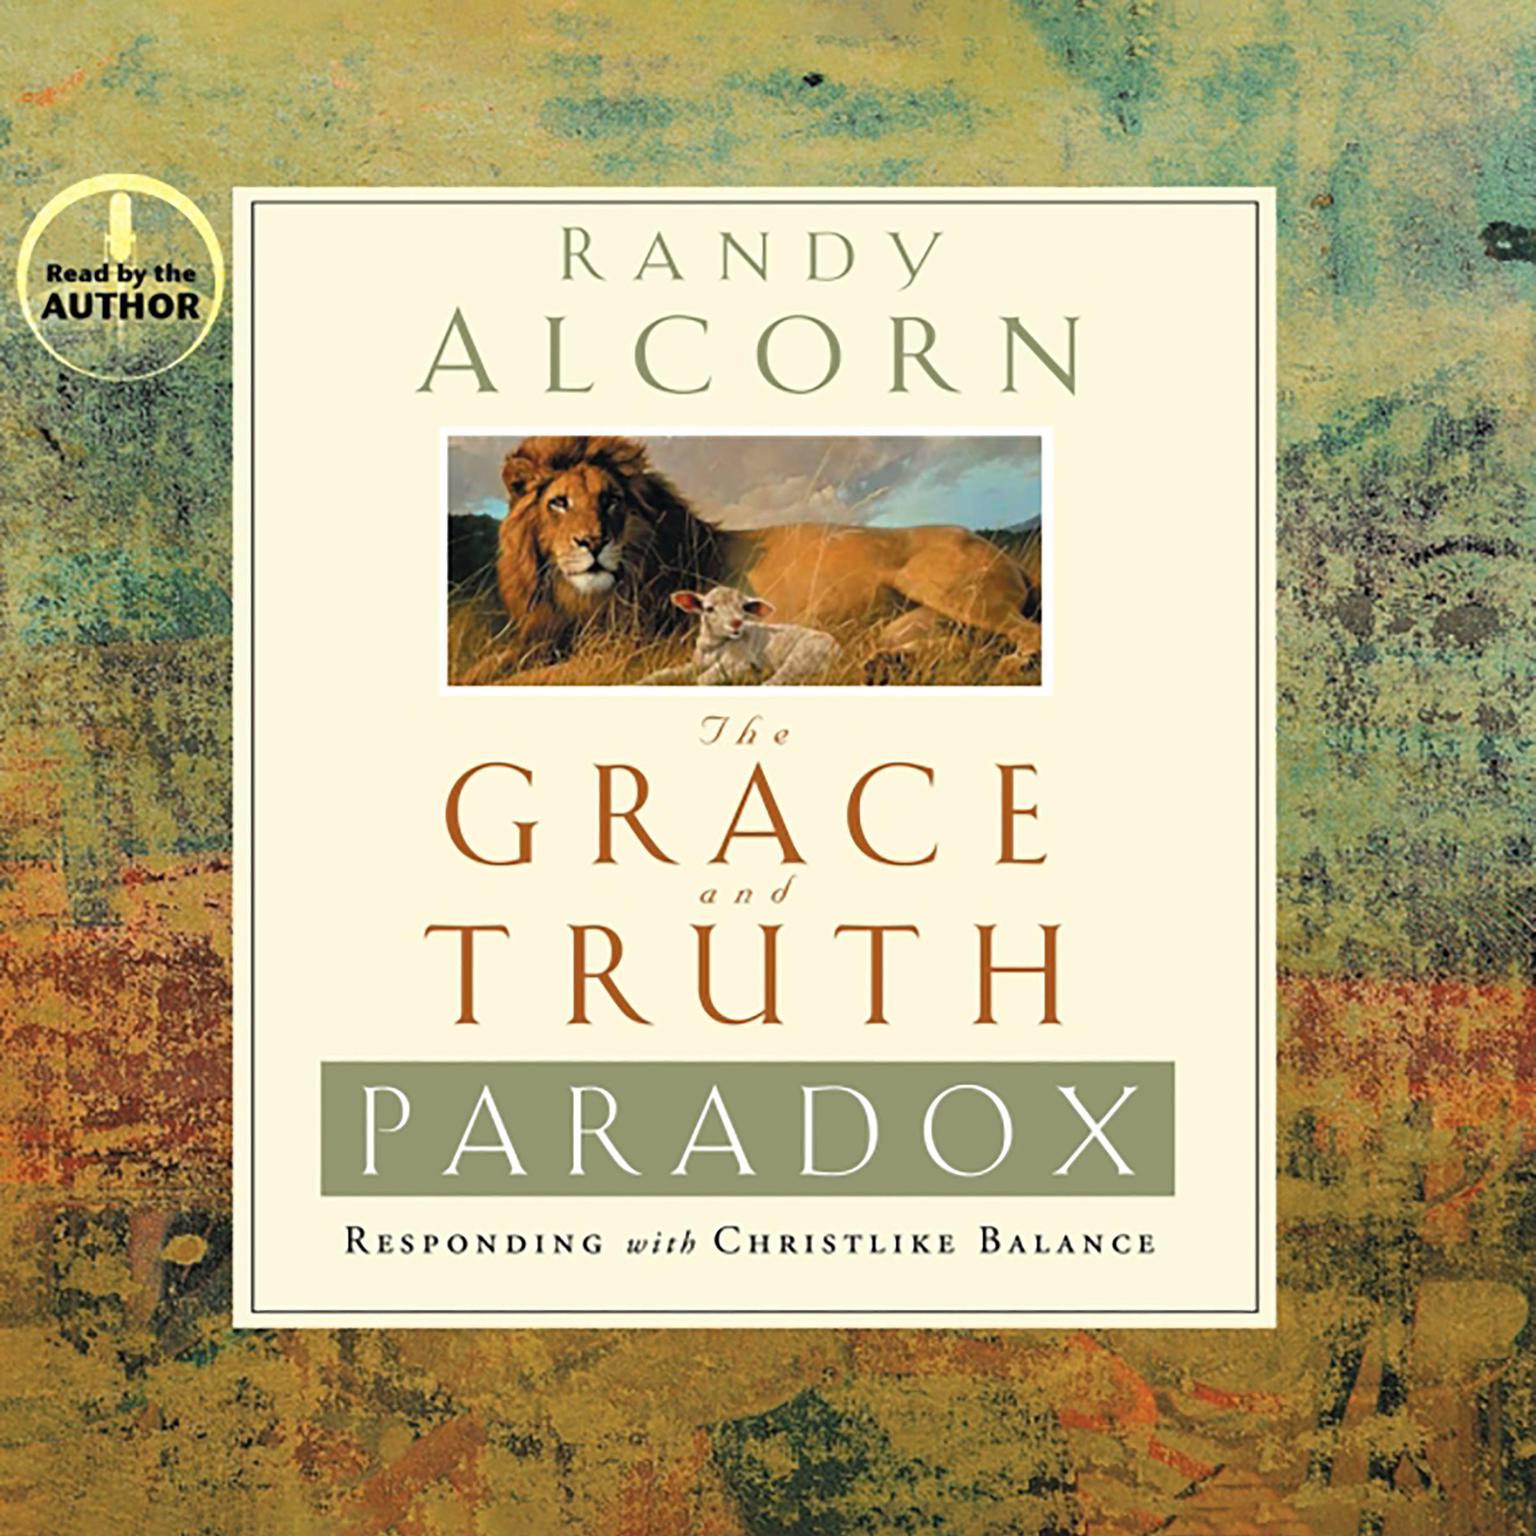 The Grace and Truth Paradox: Responding With Christlike Balance Audiobook, by Randy Alcorn